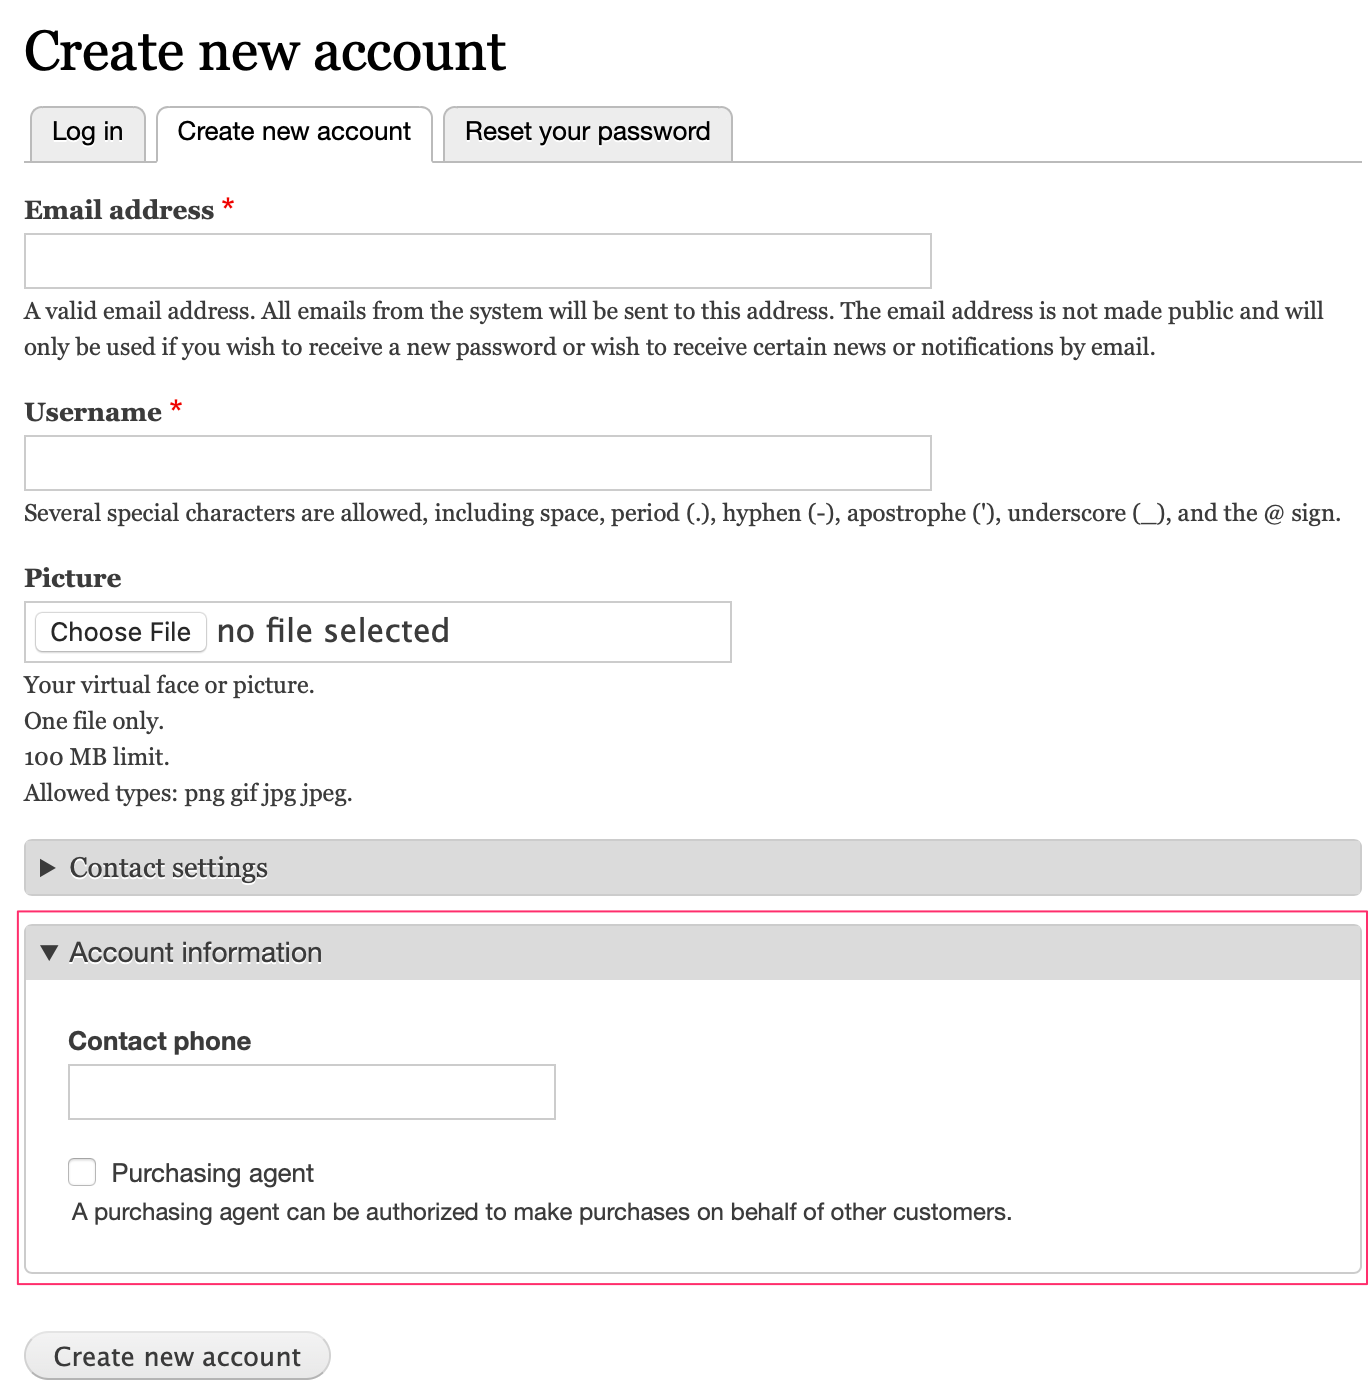 User registration form with included profile